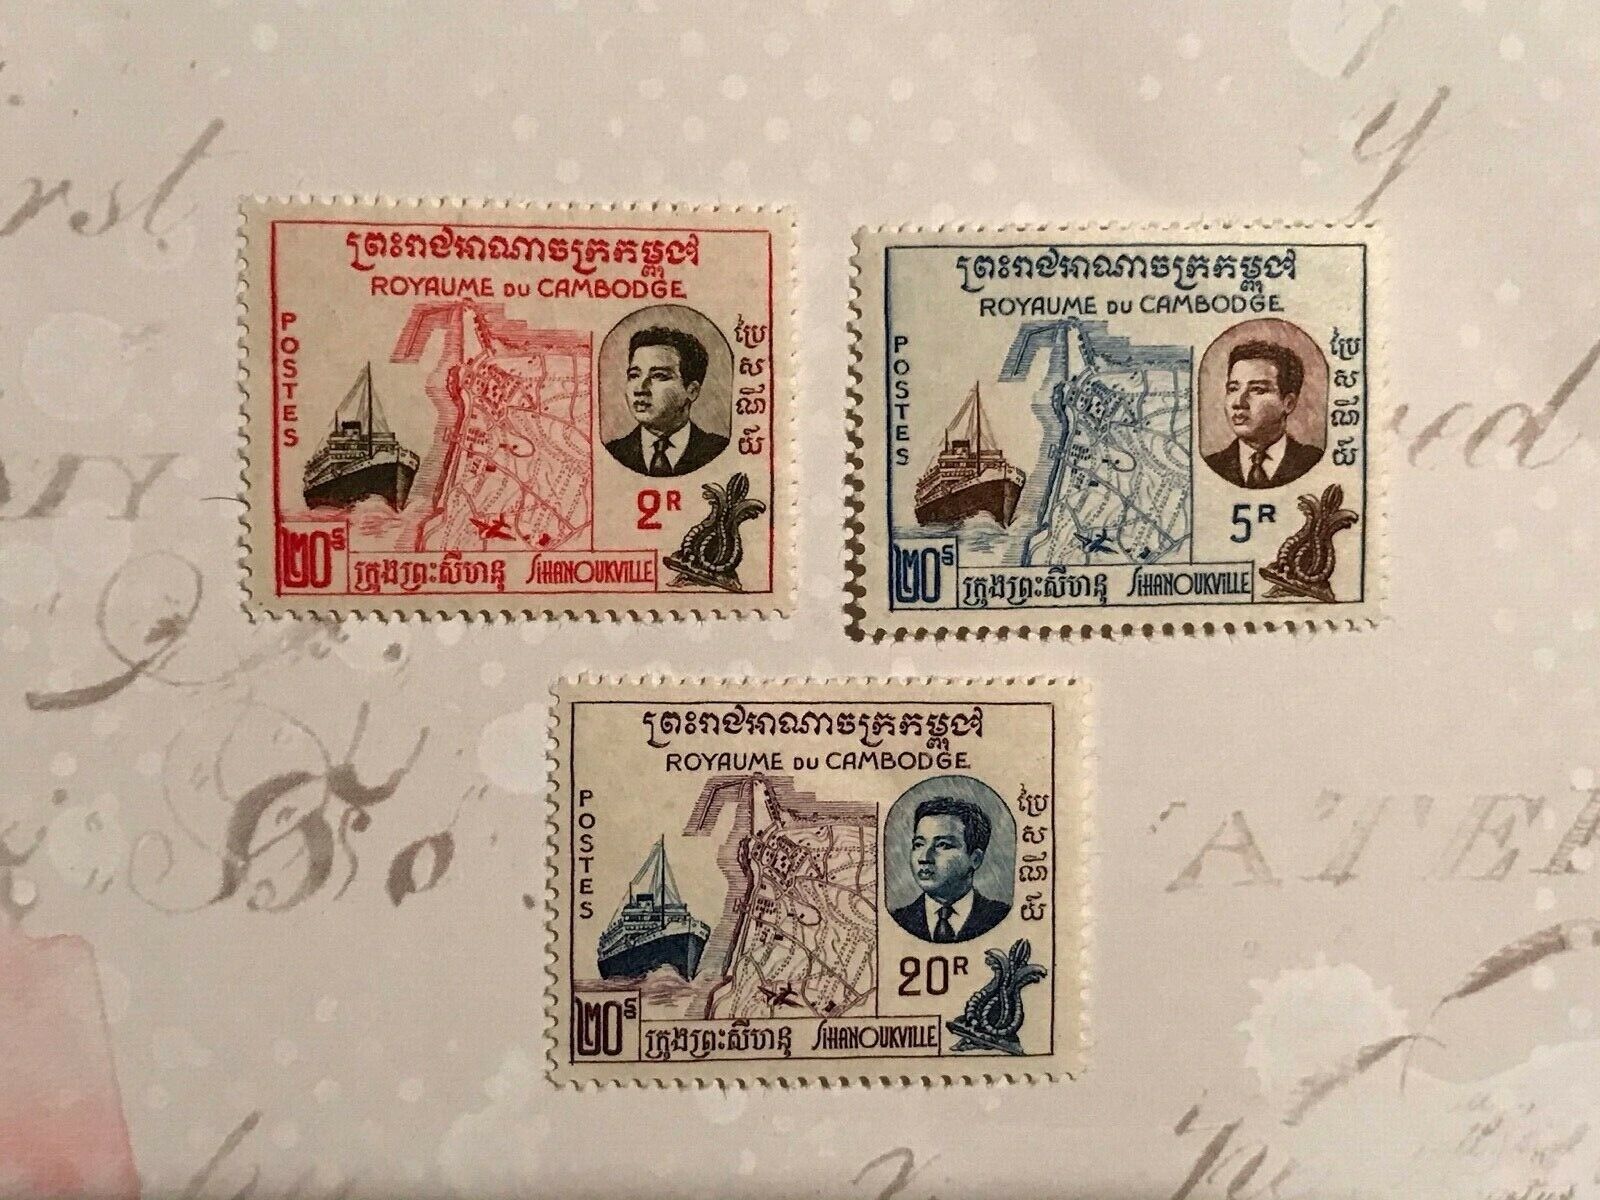 Cambodia Port Of Sihanoukville Issues Of 1959-60